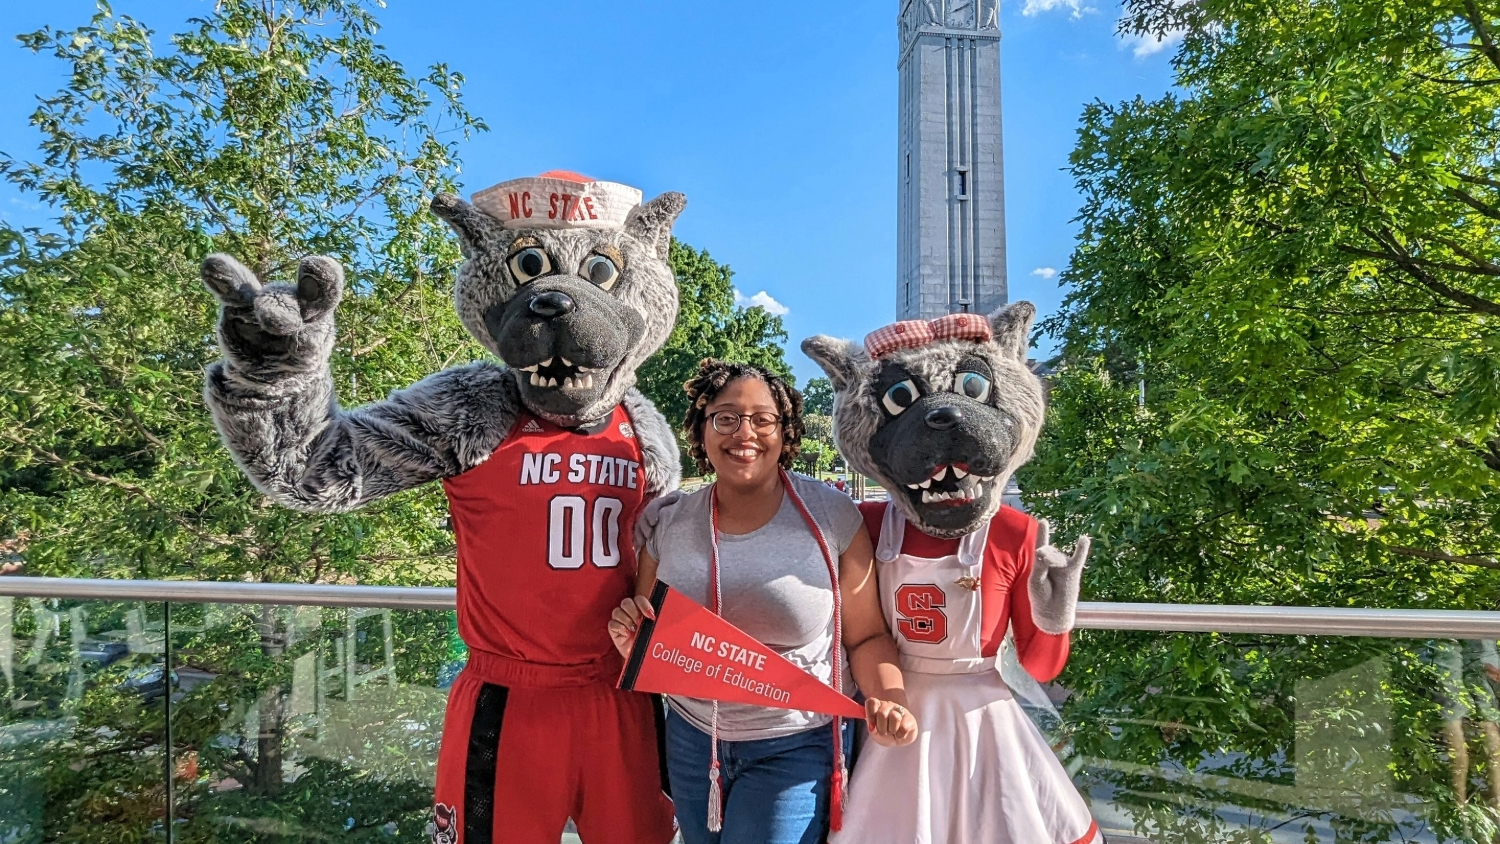 A woman smiling between two NC State mascots outdoors with the NC State belltower in the background.